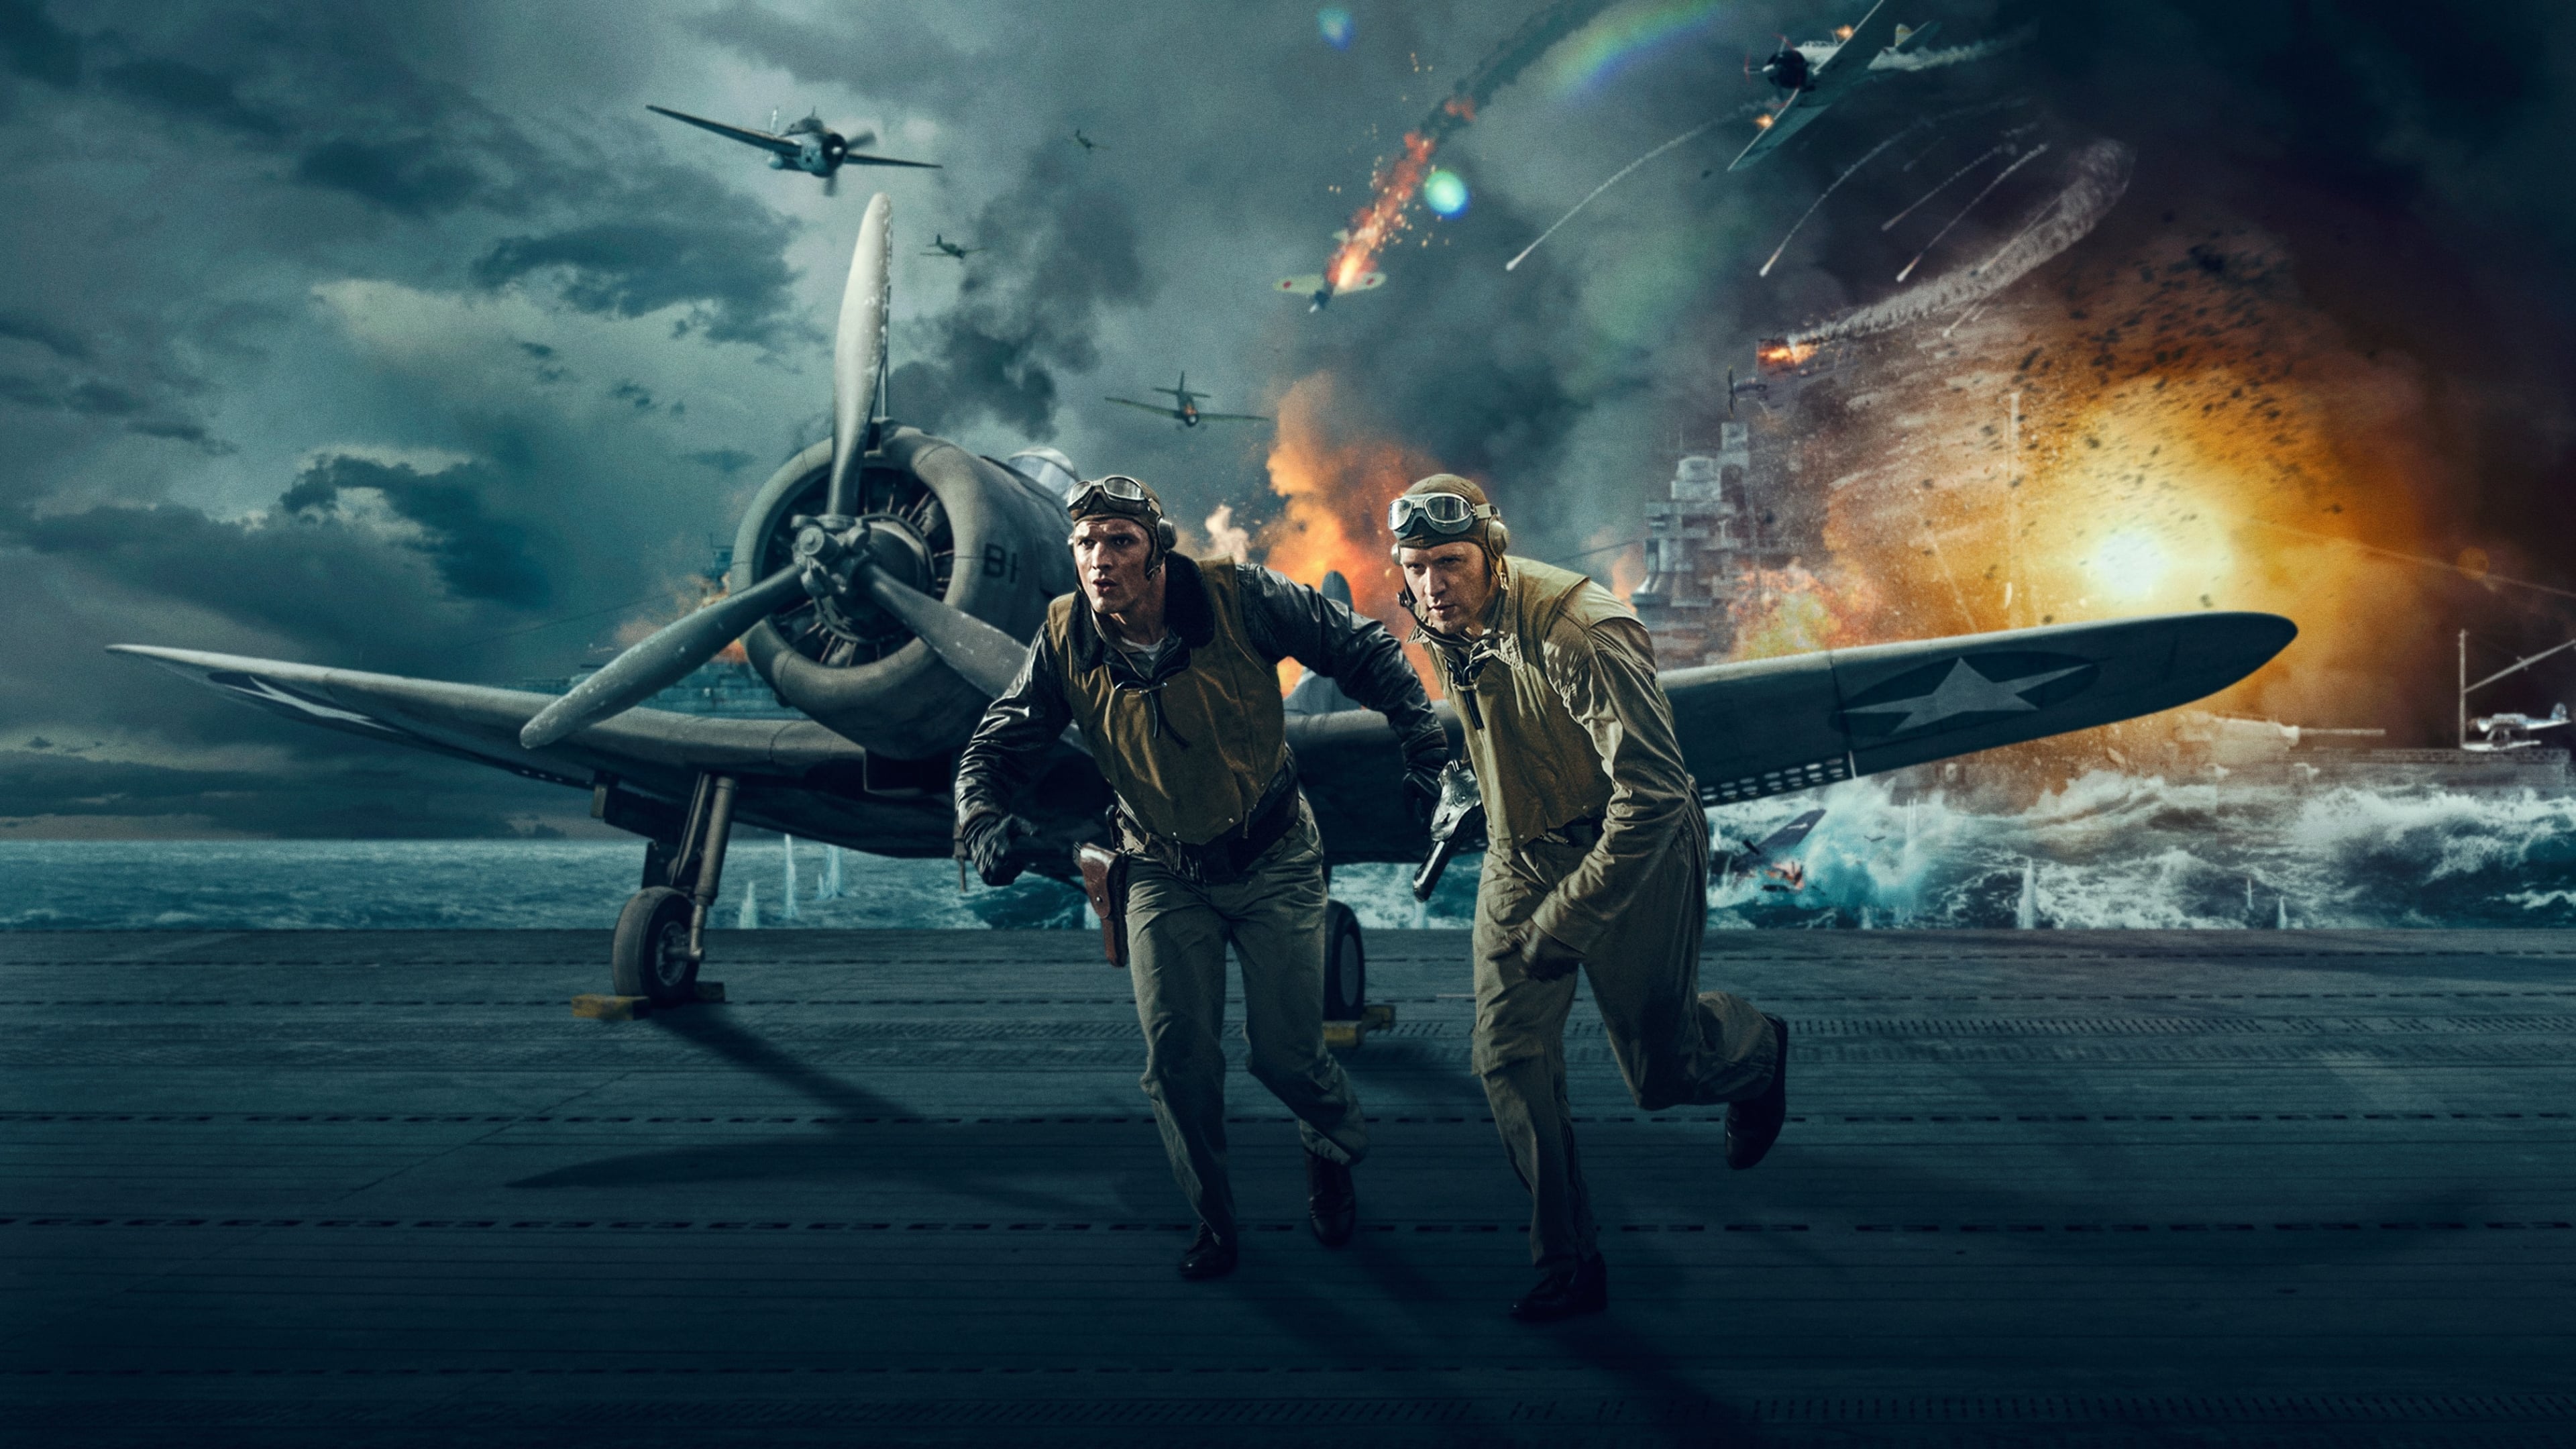 Midway 2019 123movies